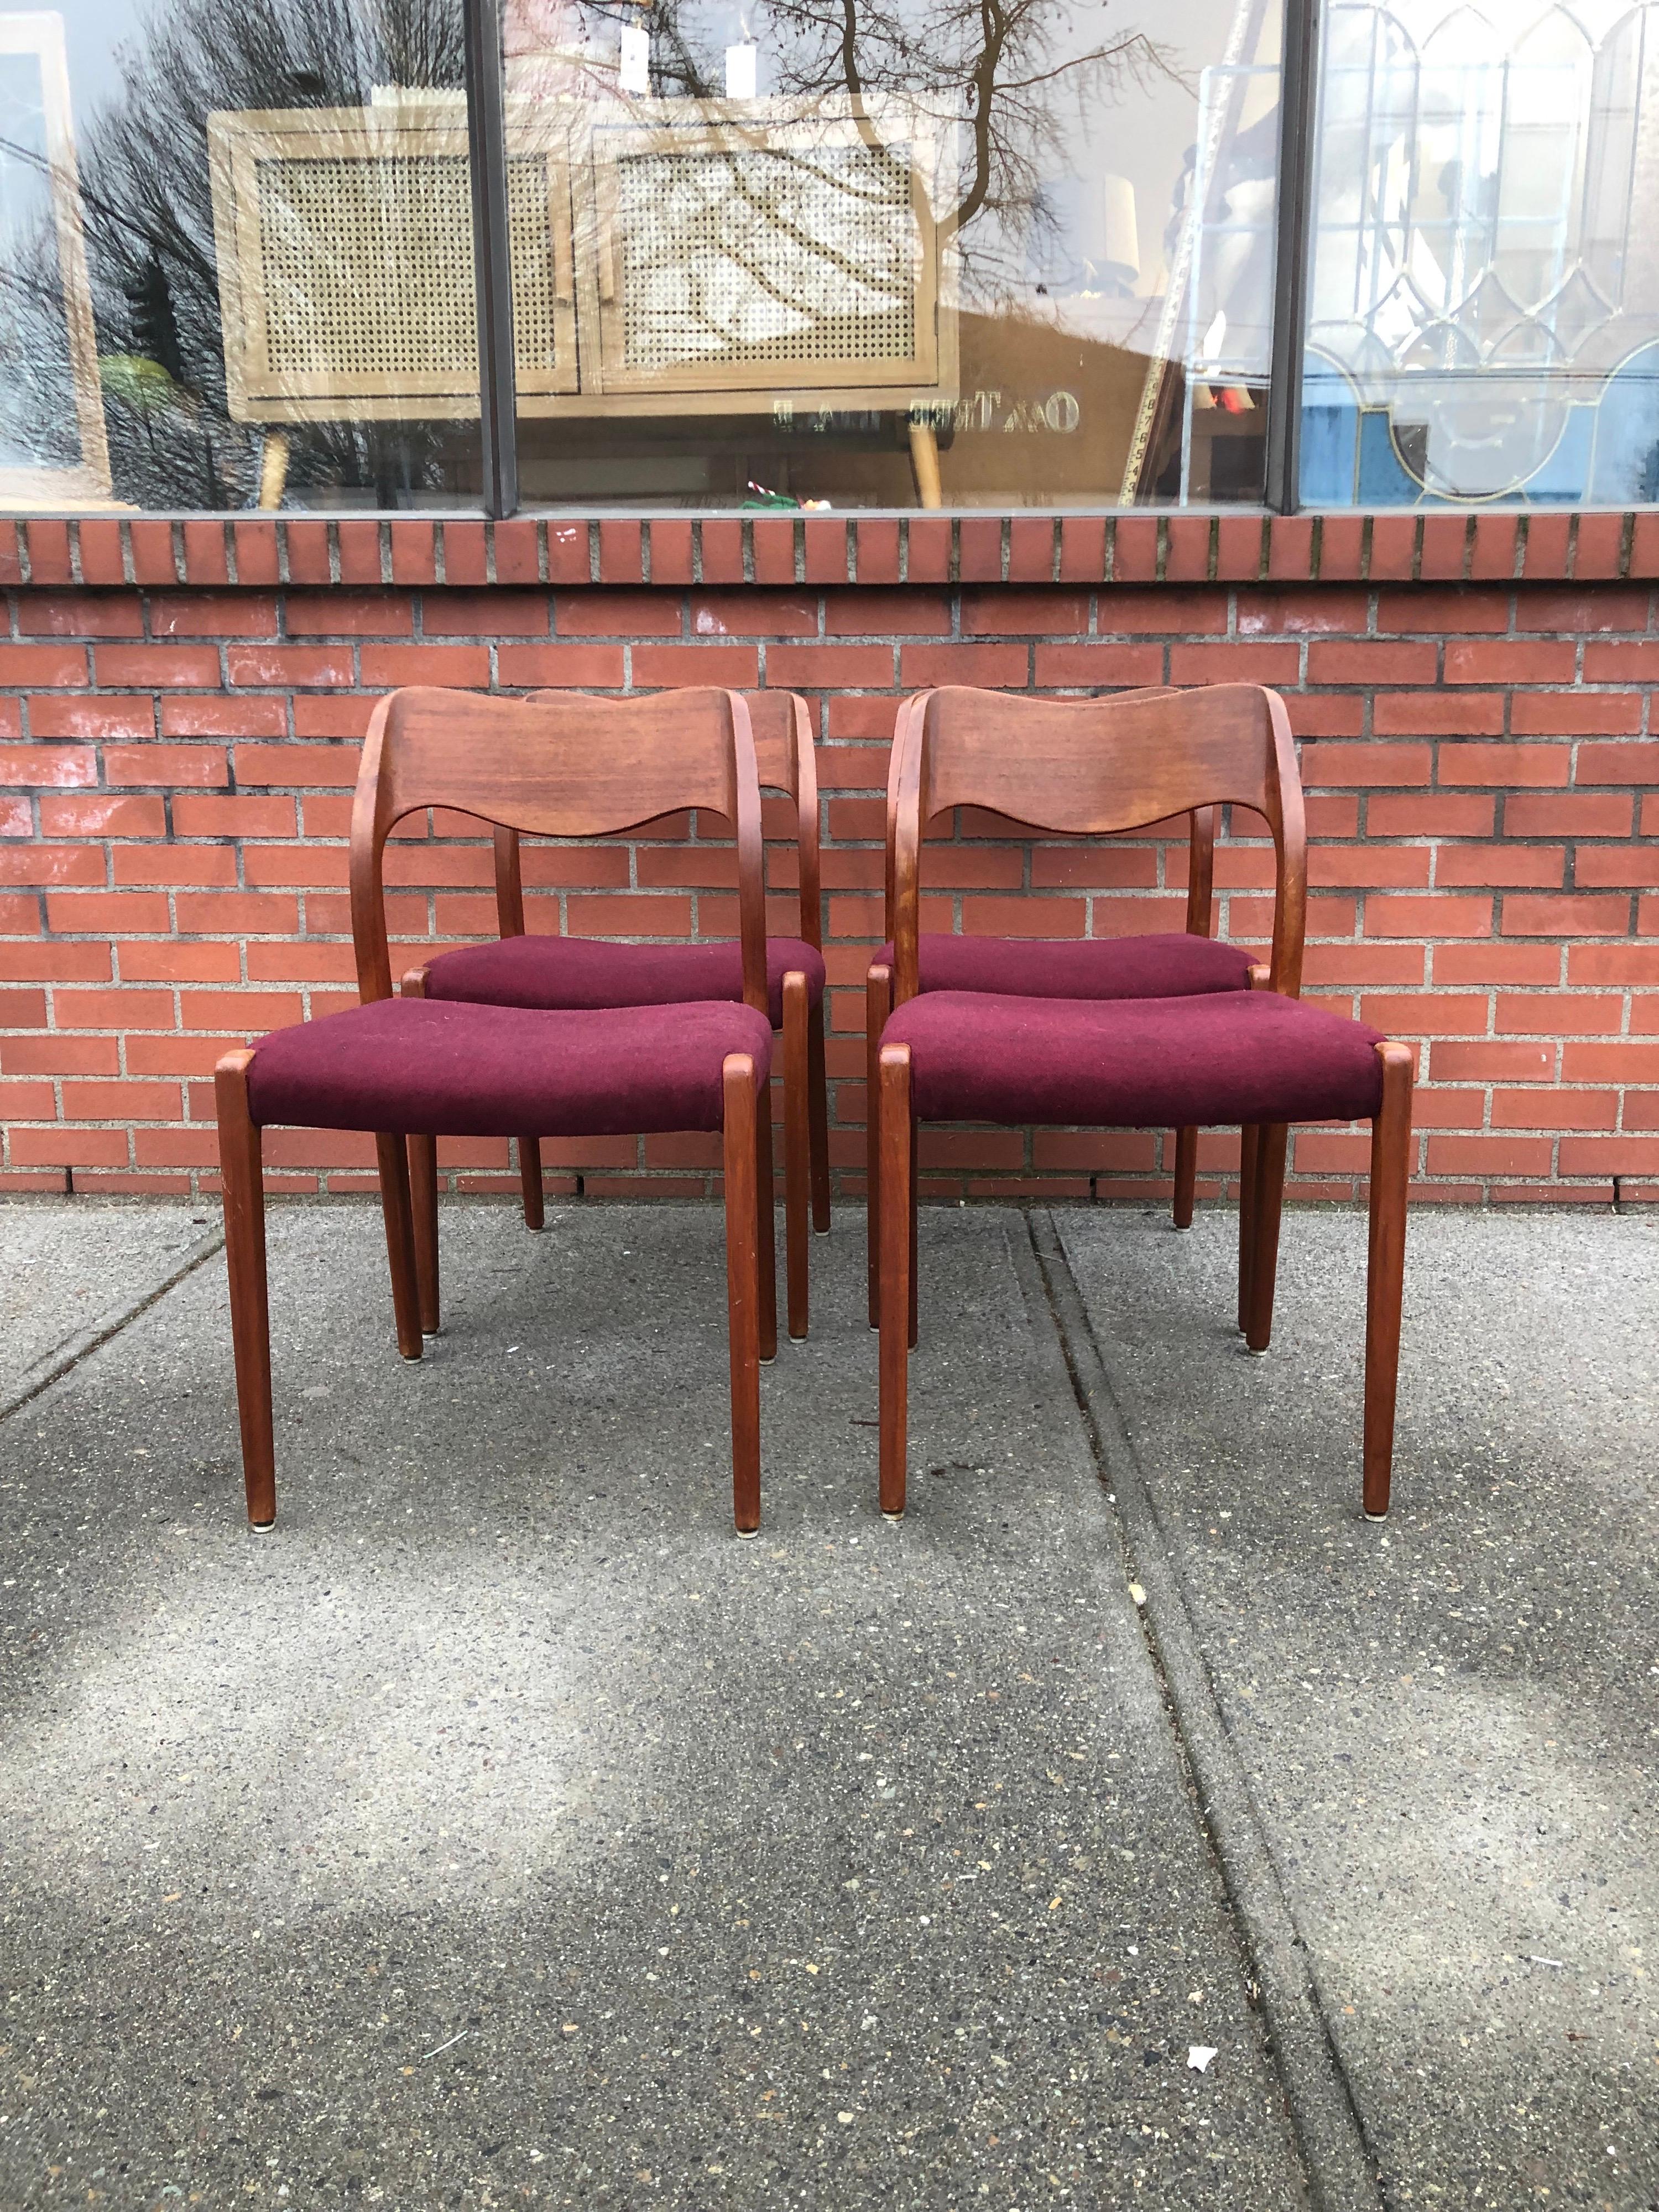 A set of 4 Scandinavian Mid-Century Modern Model 71 dining chairs in teak by Niels Otto Møller for JL Mollers, Denmark.

Overall the chairs are in great condition with occasional minimal signs of being used.